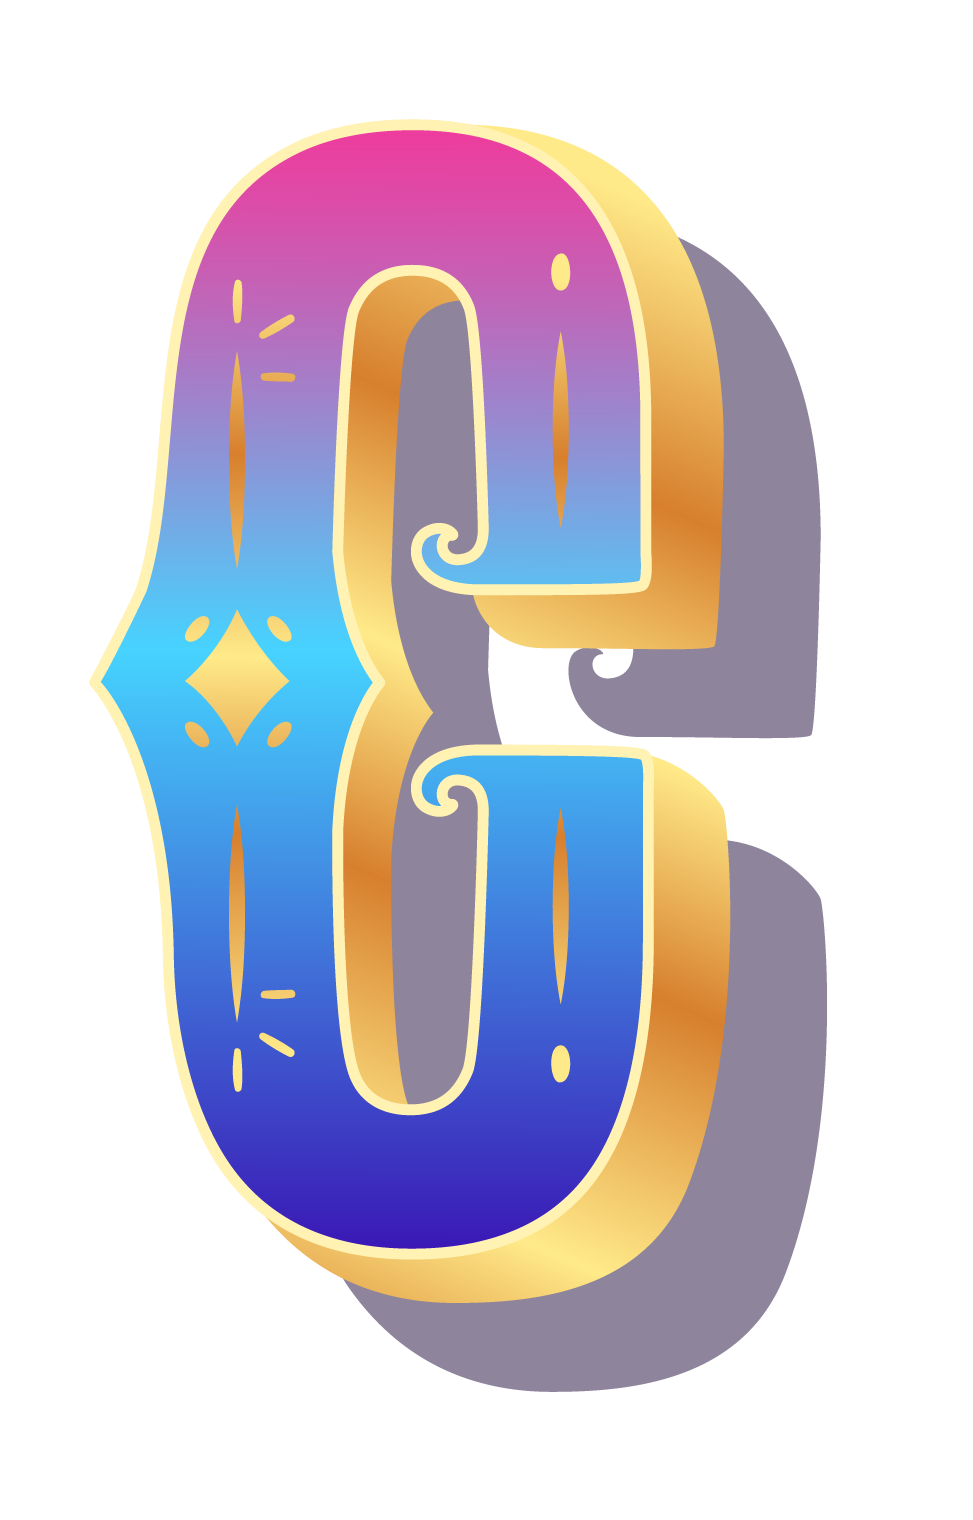 Letter C PNG HD Free Image